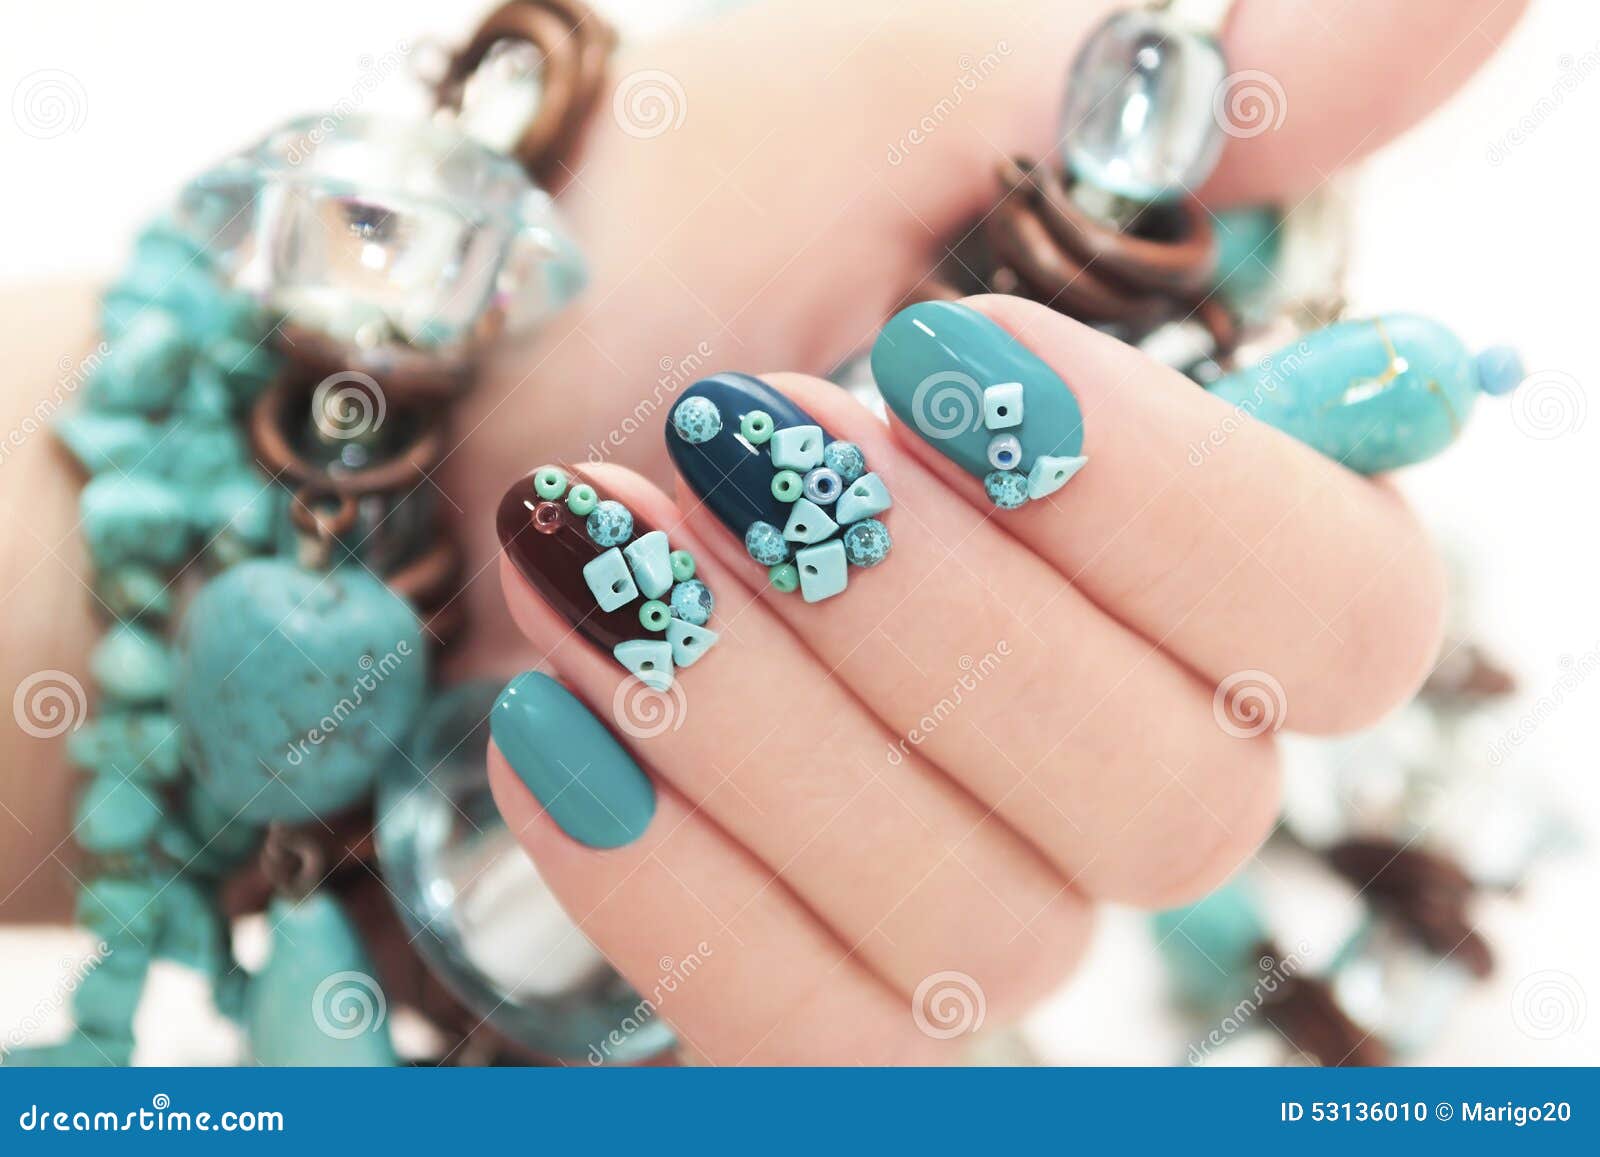 manicure with beads and turquoise.